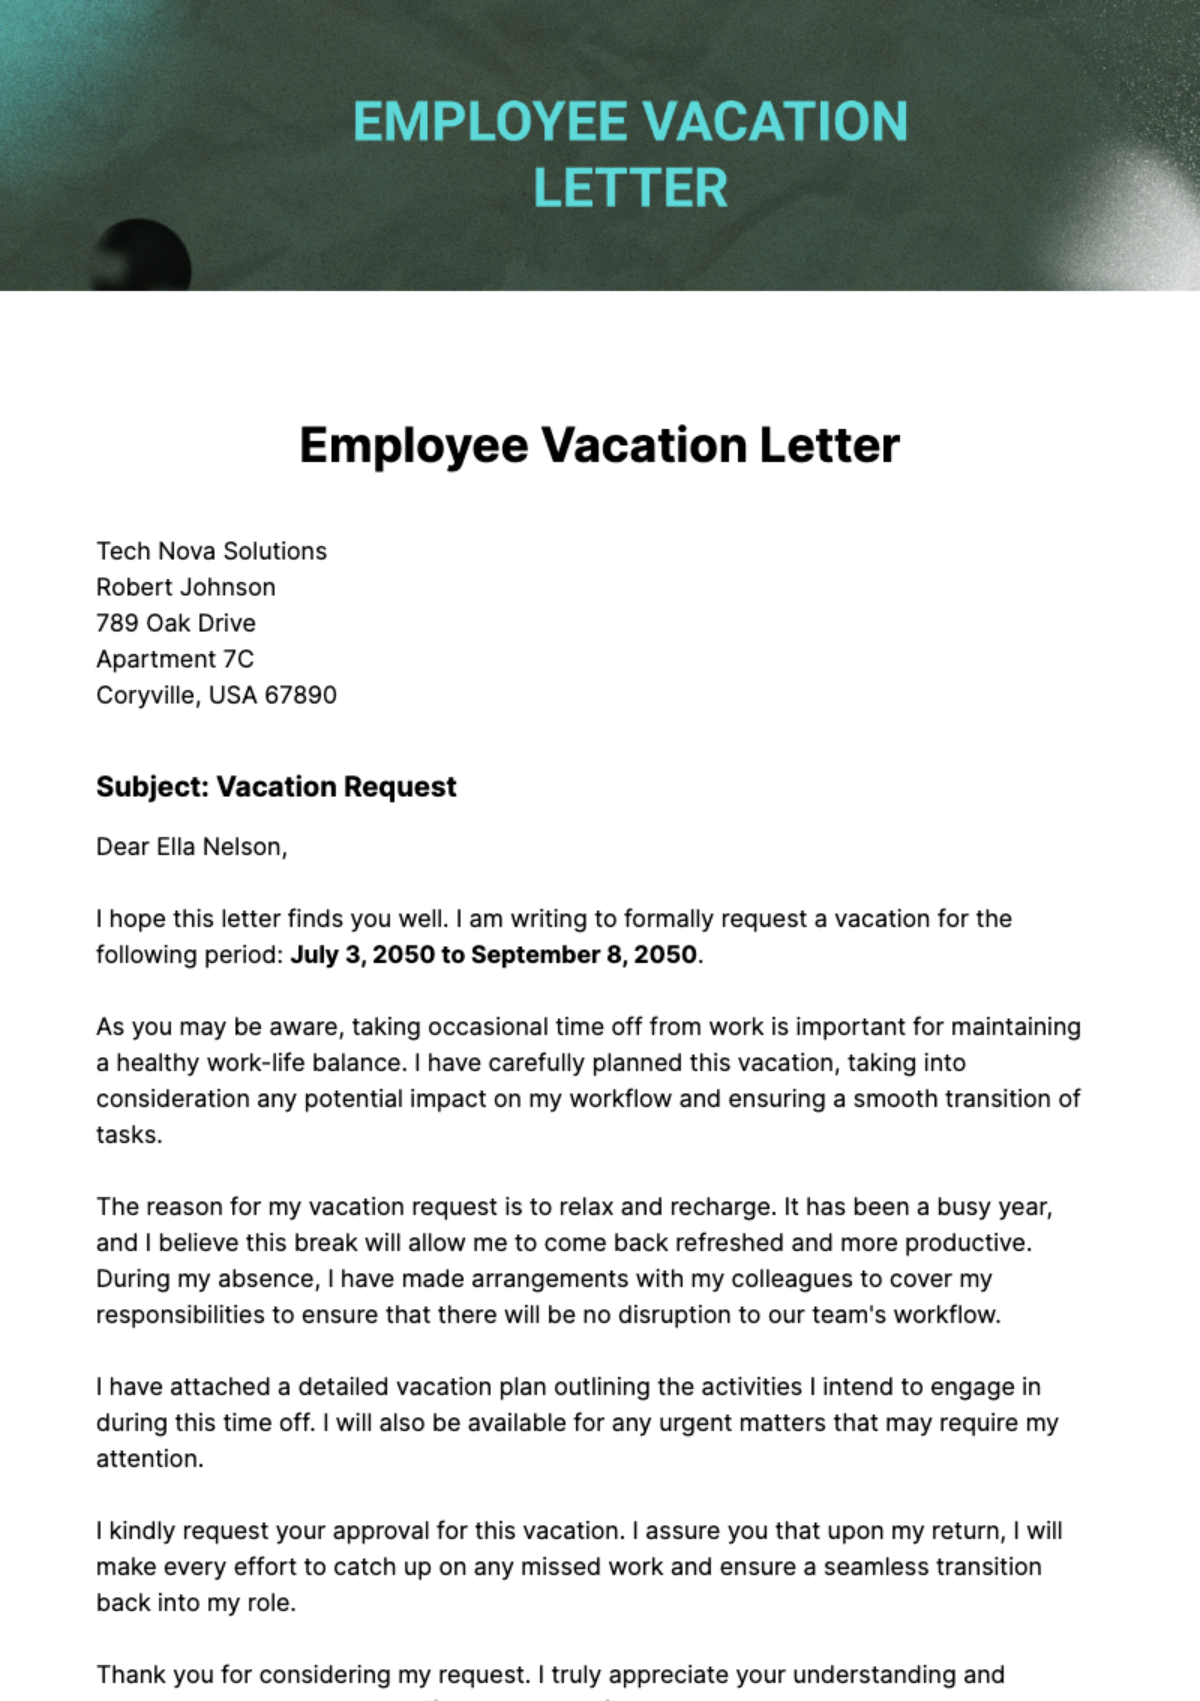 Employee Vacation Letter Template